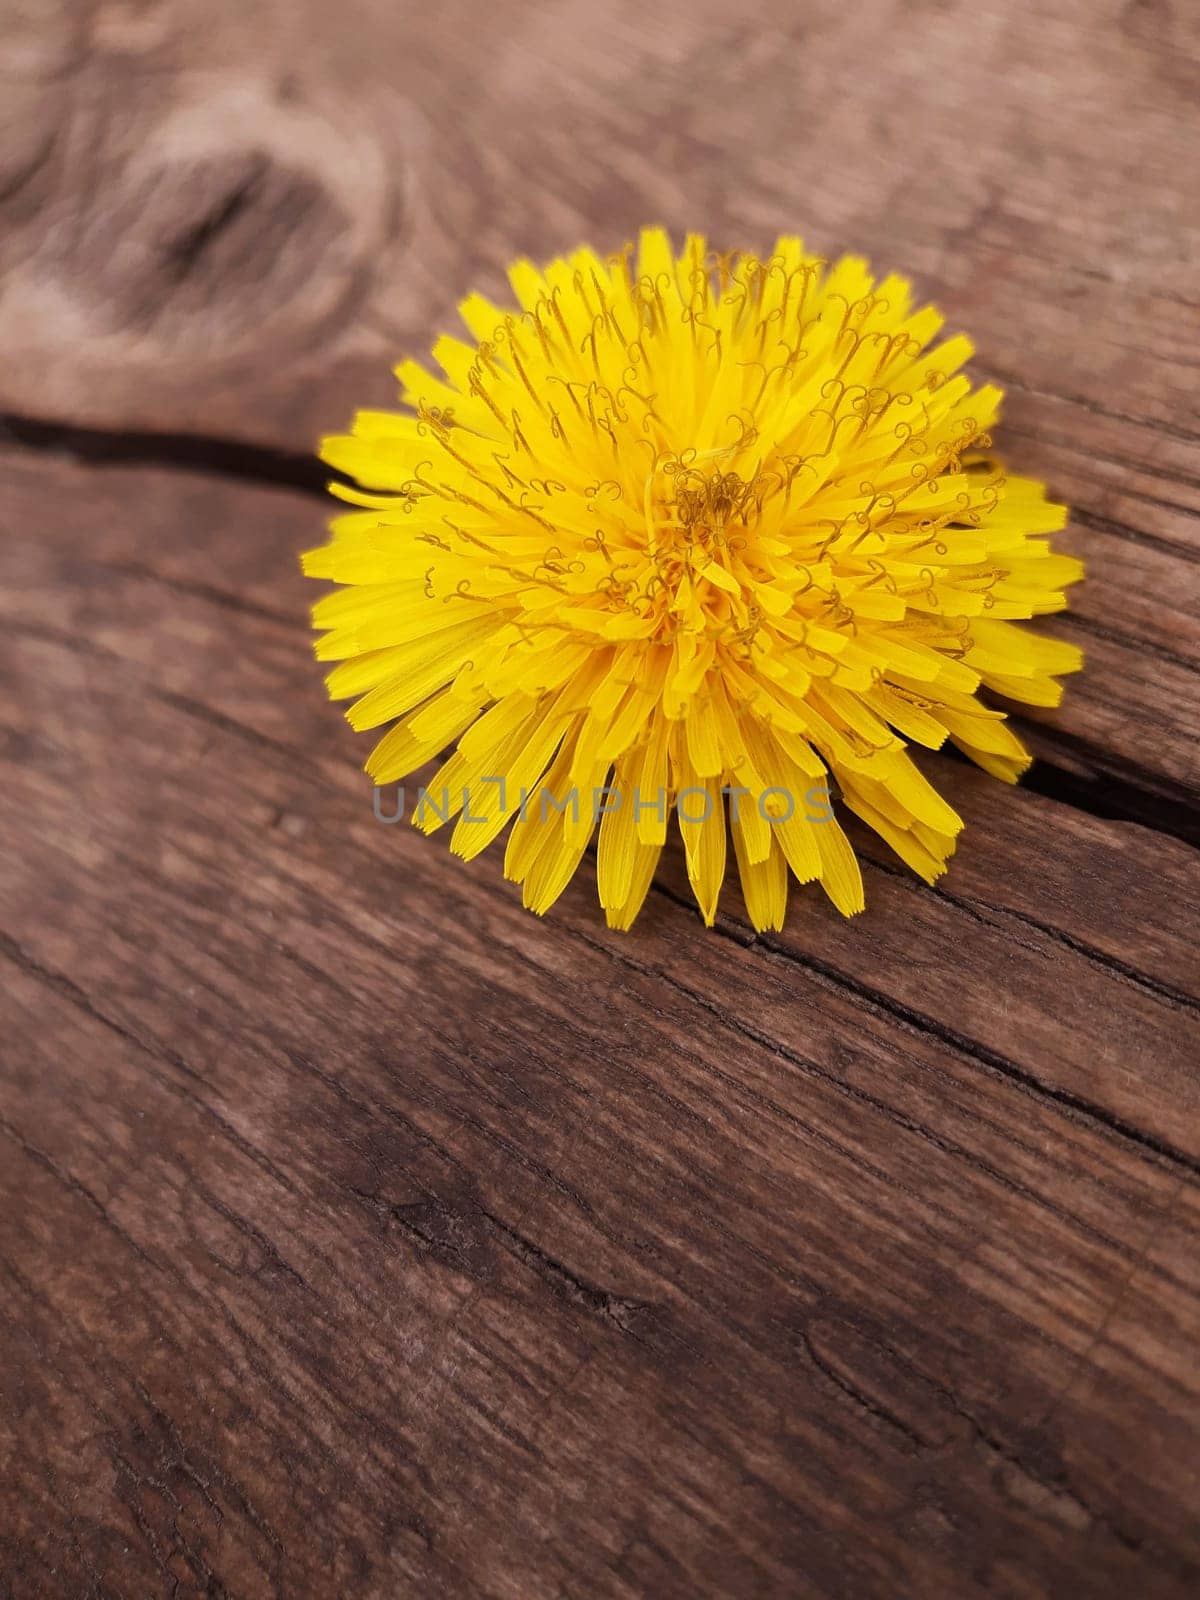 Dandelion flower on a wooden stump in early spring in the park close-up by Endusik